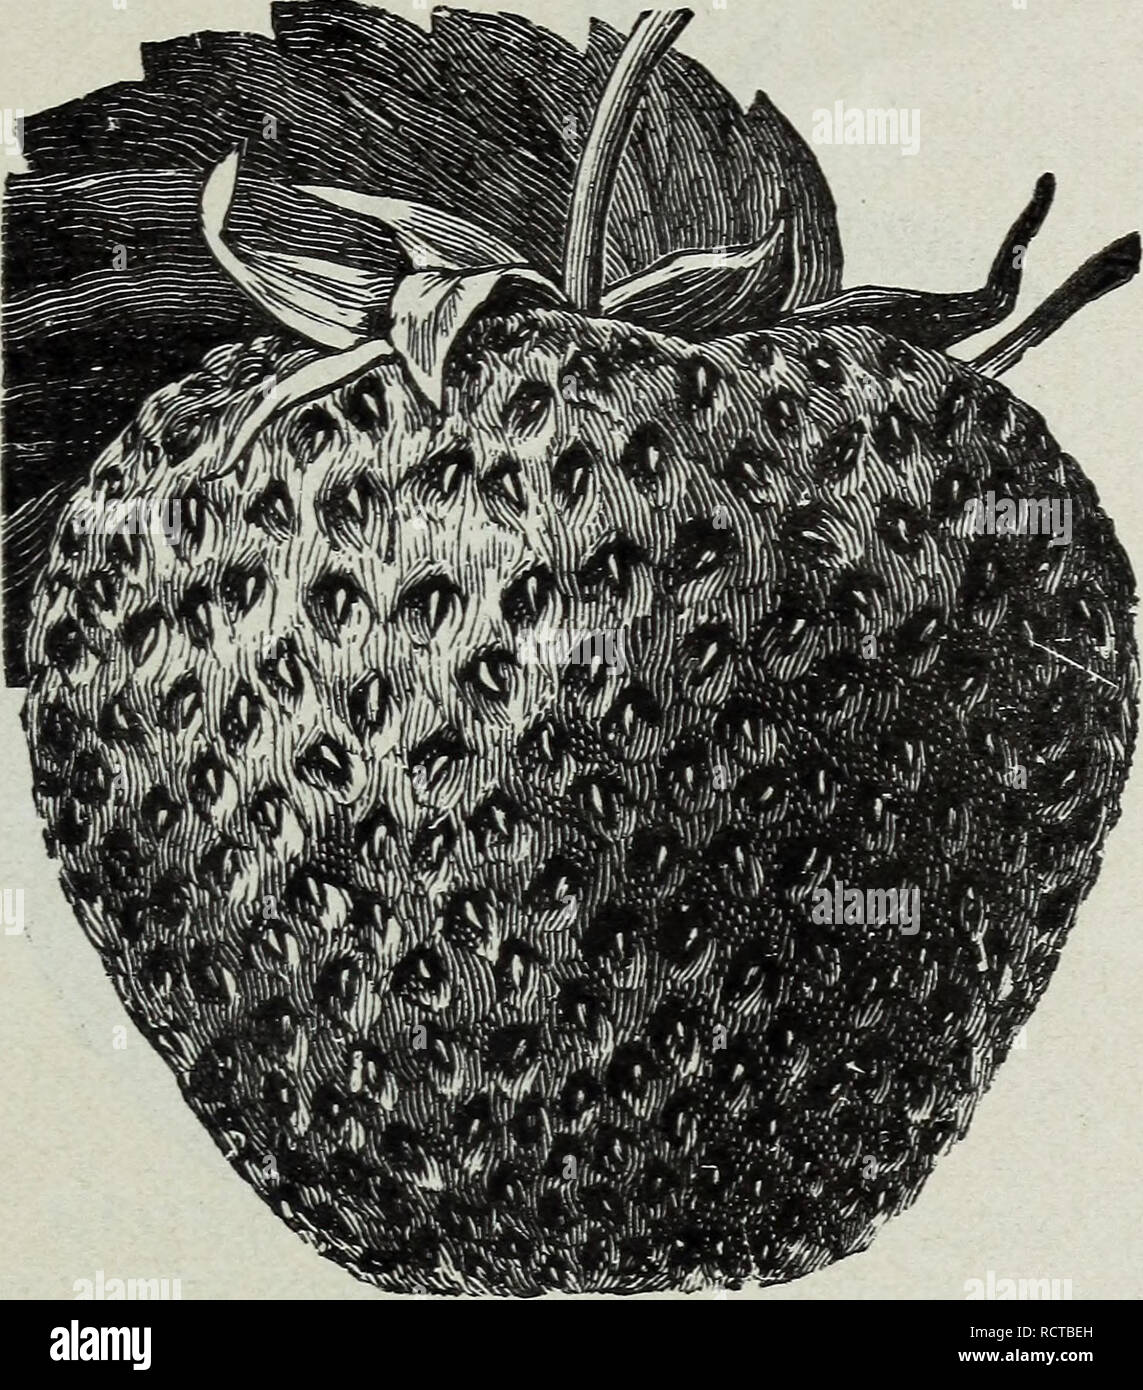 . Descriptive strawberry plant catalogue of 5,000,000 Perdue's best quality strawberry plants : grown at Perdue's strawberry plant farm. Nurseries (Horticulture) Maryland Showell Catalogs; Nursery stock Maryland Showell Catalogs; Strawberries Varieties Maryland Showell Catalogs. Showell, Maryland. BIG JOE. (Joe Johnson). (Mid-season to late). Makes enough plants for a good fruiting bed, plants are very large, exceed- ingly vigorous and healthy, makes more plants than the well known Chesapeake va- riety and I consider it much better in every respect. The berries are extremely large size, bright Stock Photo